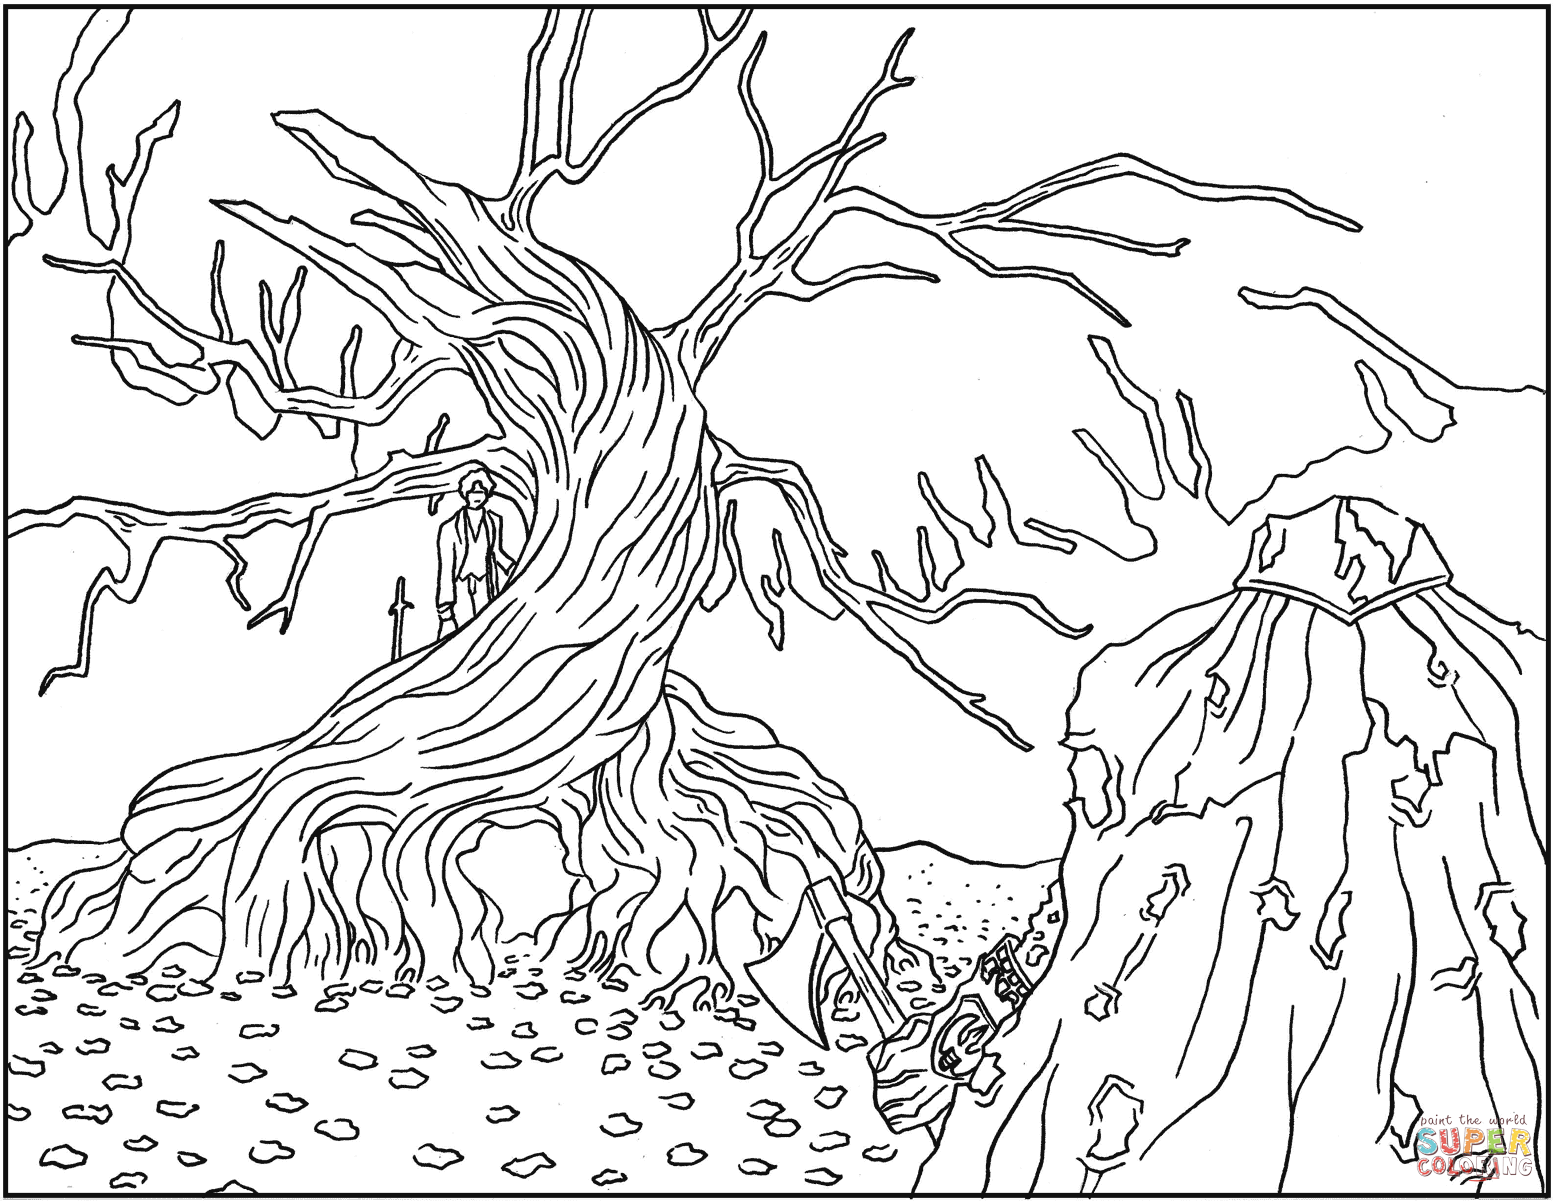 the-nightmare-before-christmas-coloring-page-0034-q1